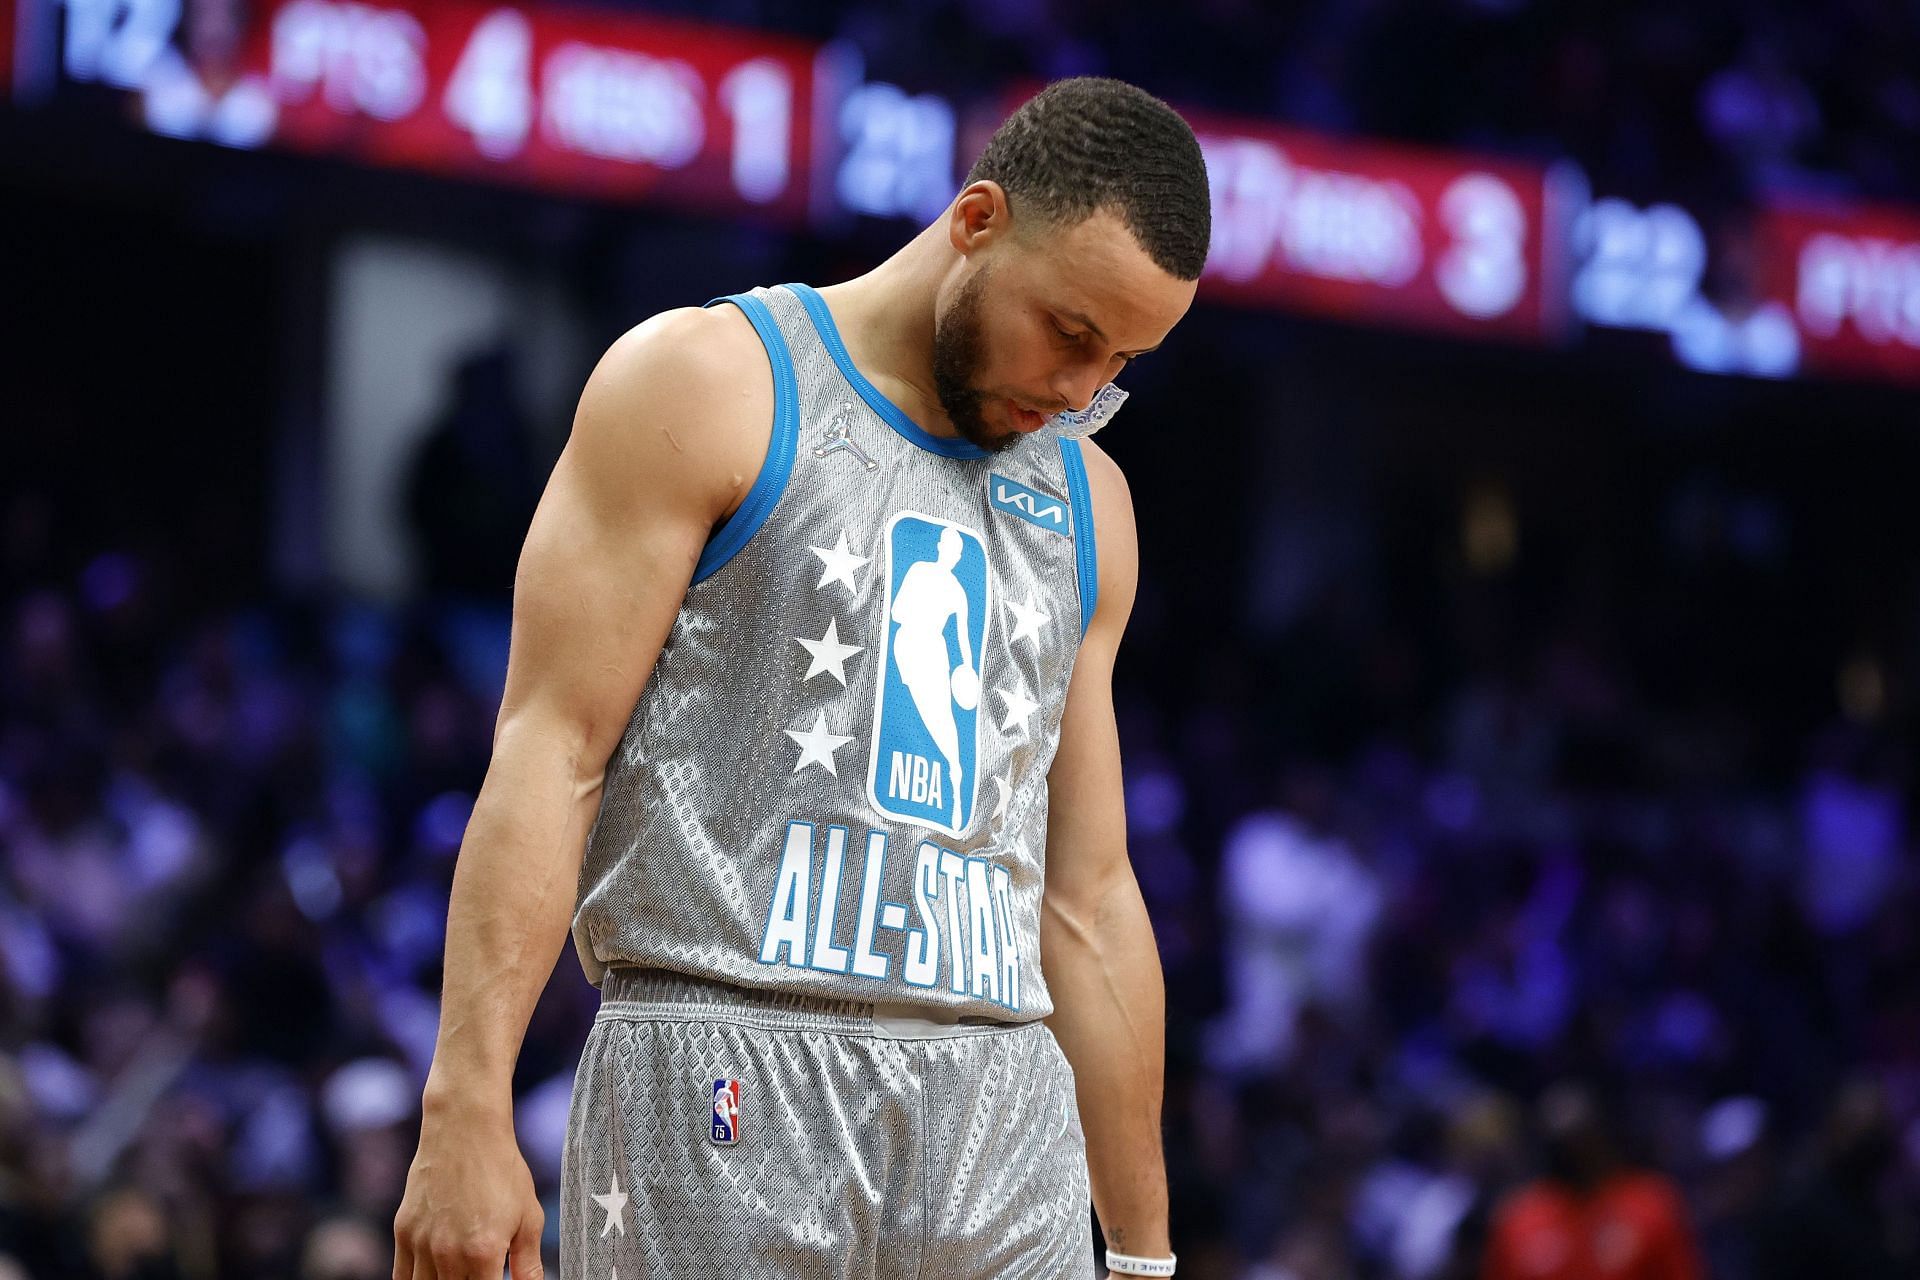 Steph Curry injury: Warriors star likely out after All-Star break